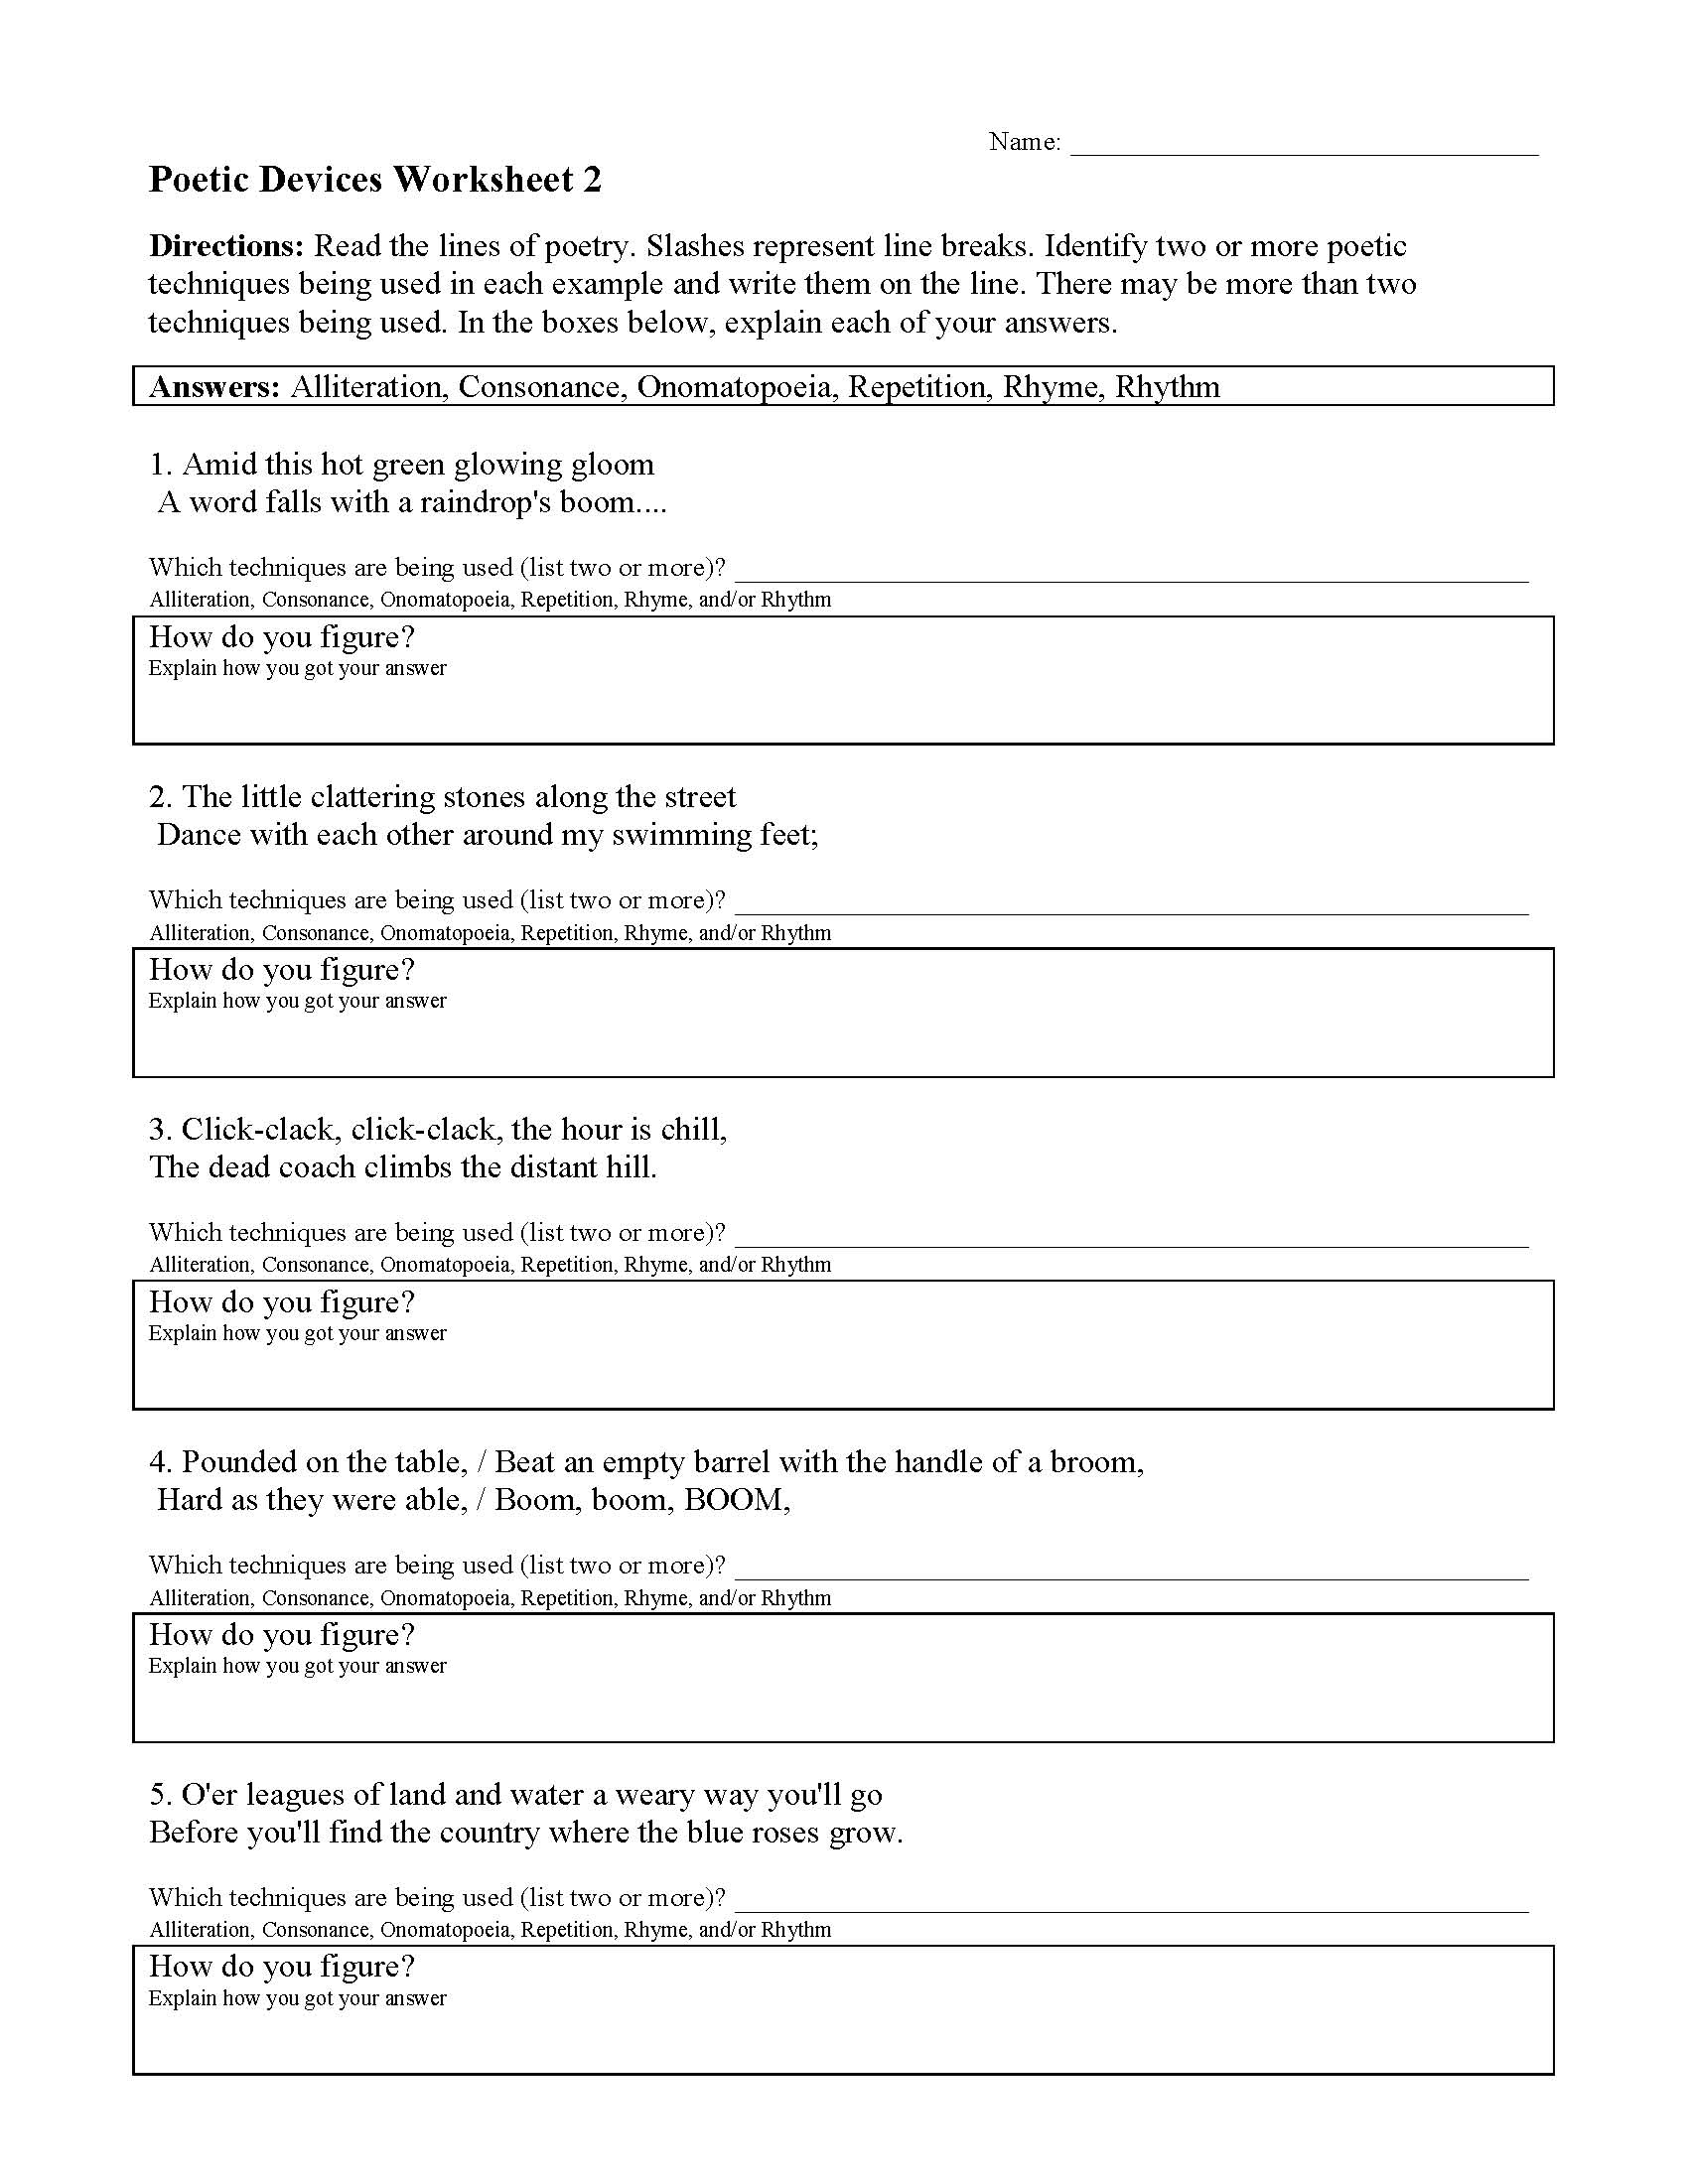 POETIC DEVICES - Definitions & Examples  Ereading Worksheets Intended For Sound Devices In Poetry Worksheet